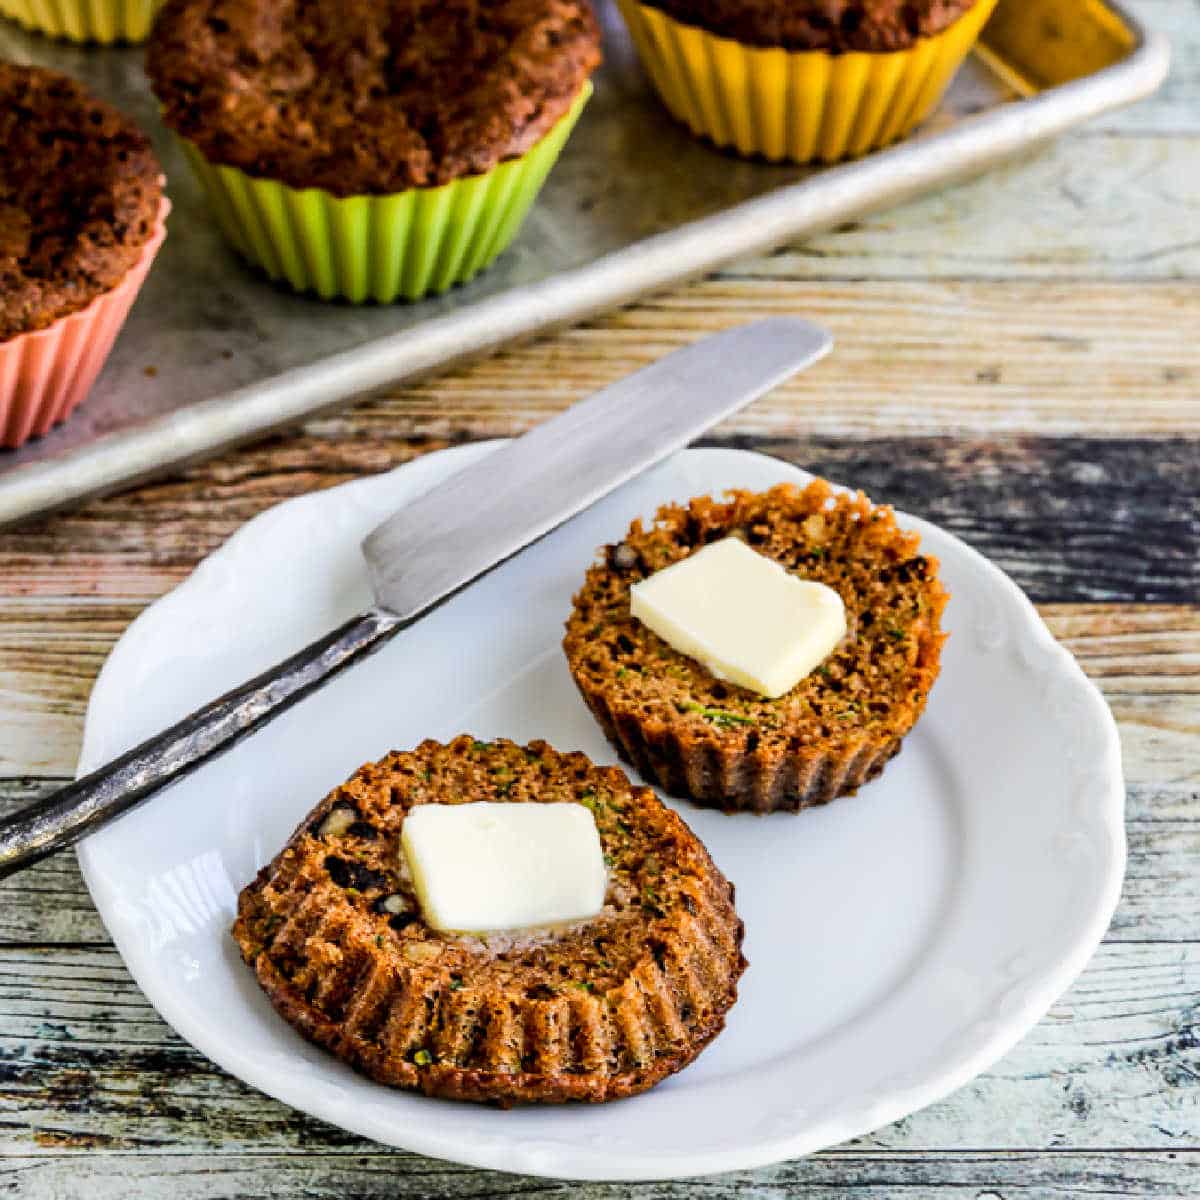 Flourless Keto Zucchini Muffins with one muffin on plate, cut in half, with pats of butter.